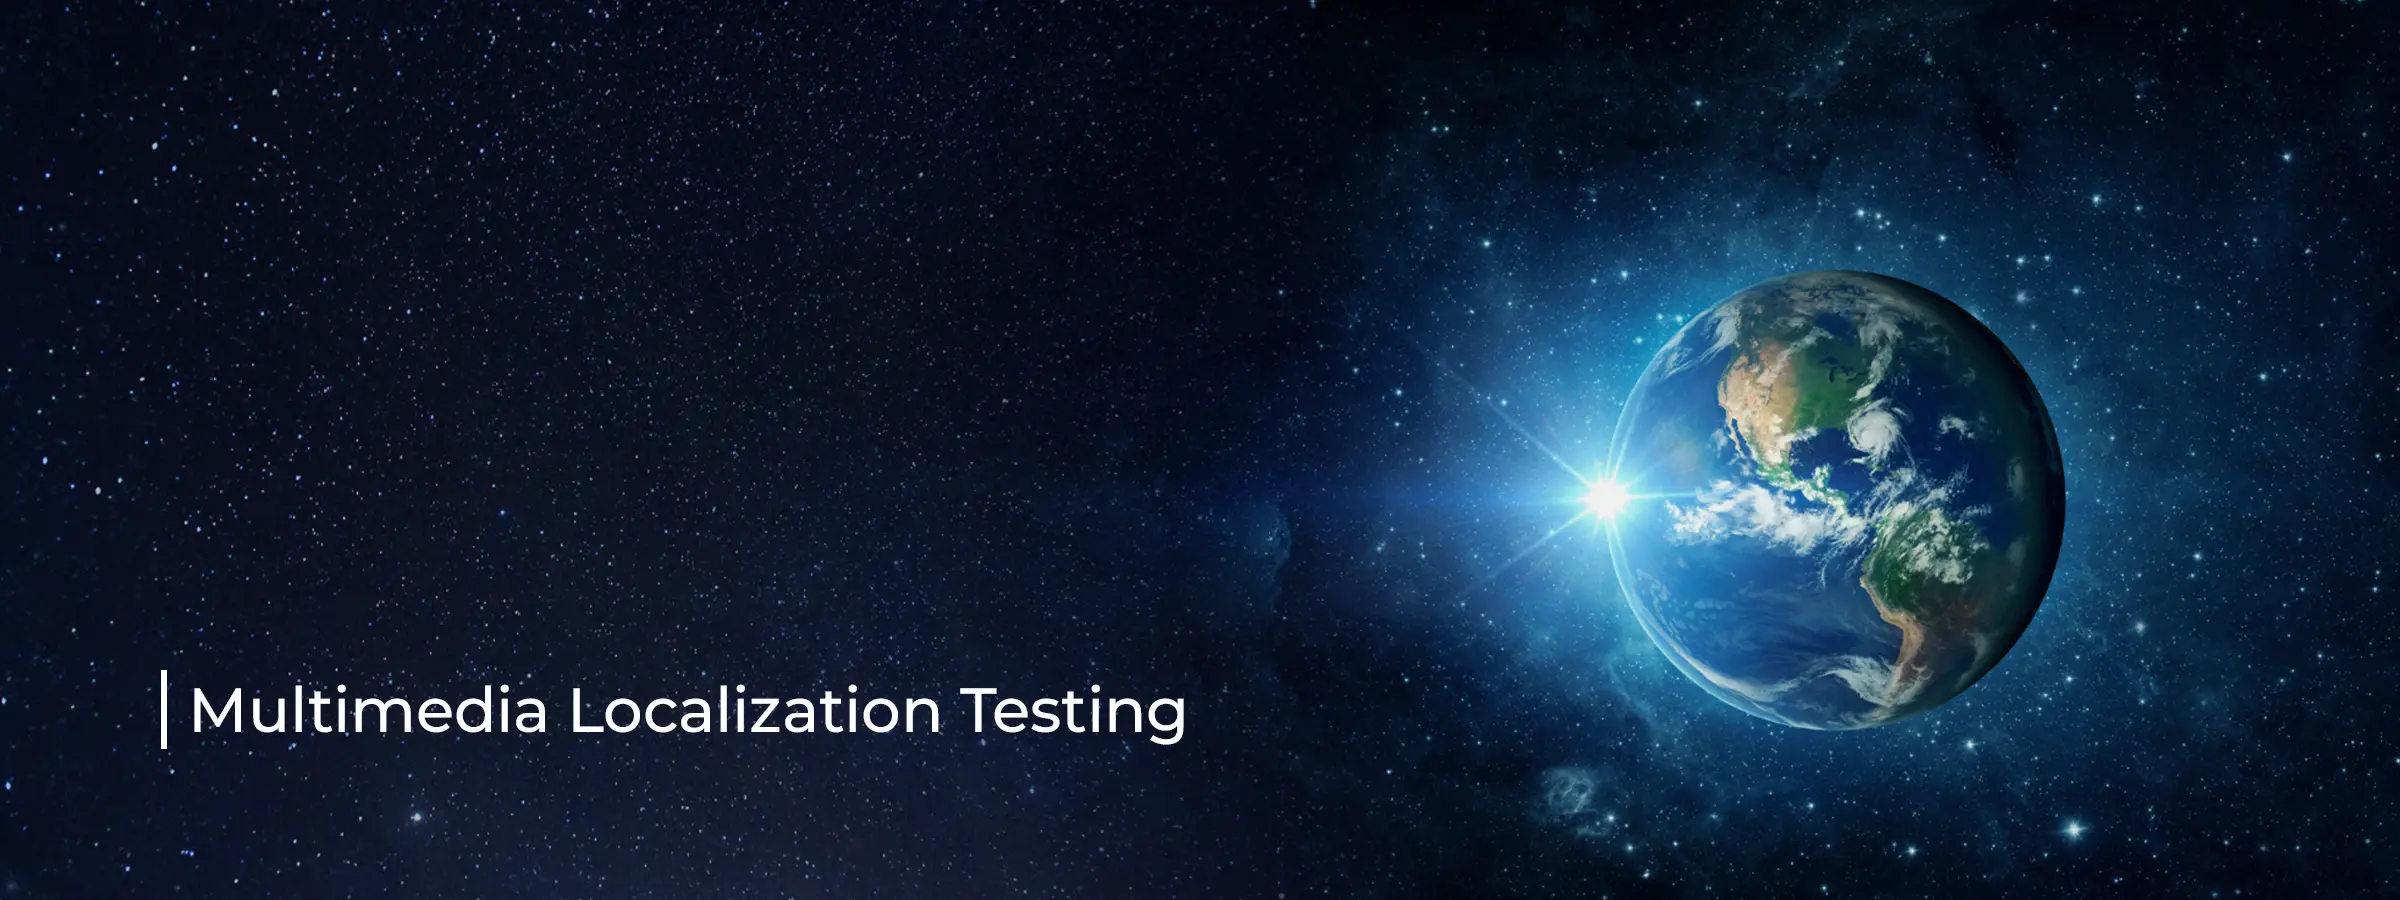 localization-testing-industry-banner